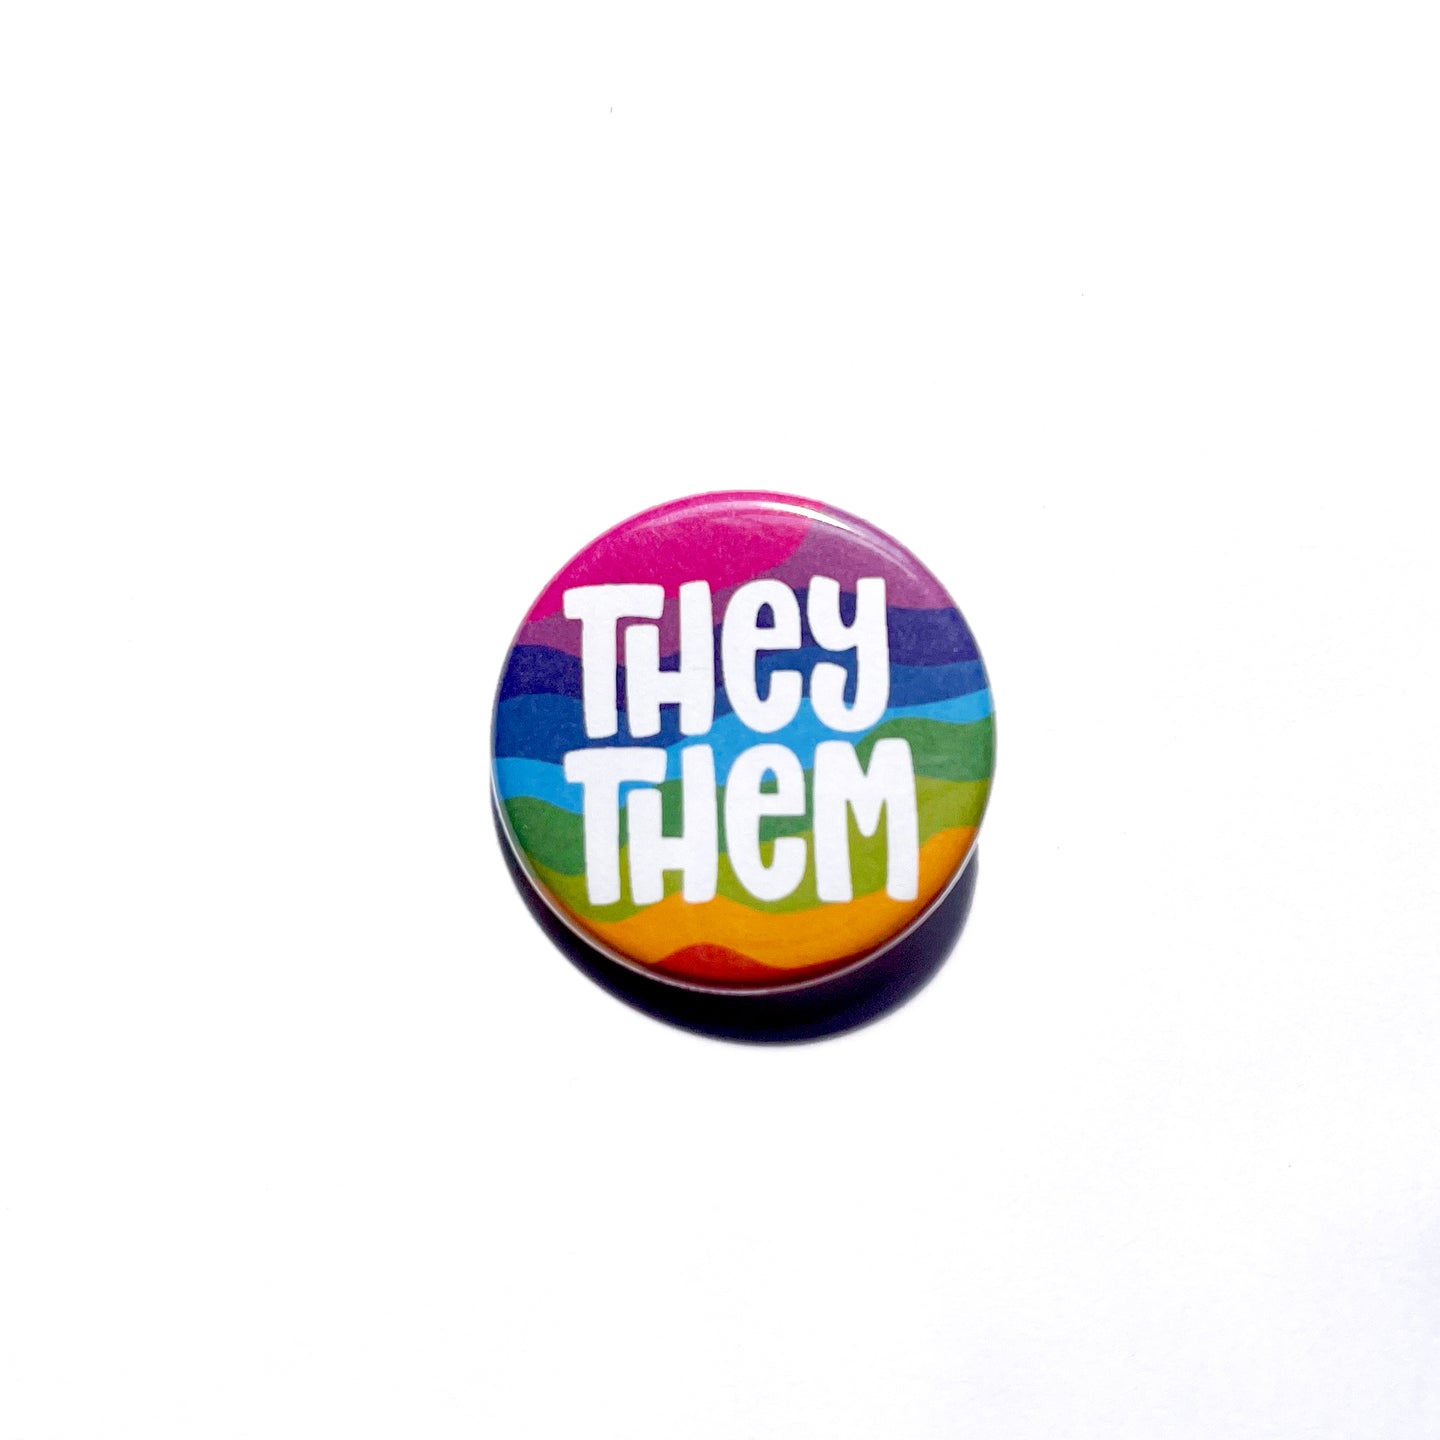 1.25” Psychedelic Swirl Pronoun Buttons